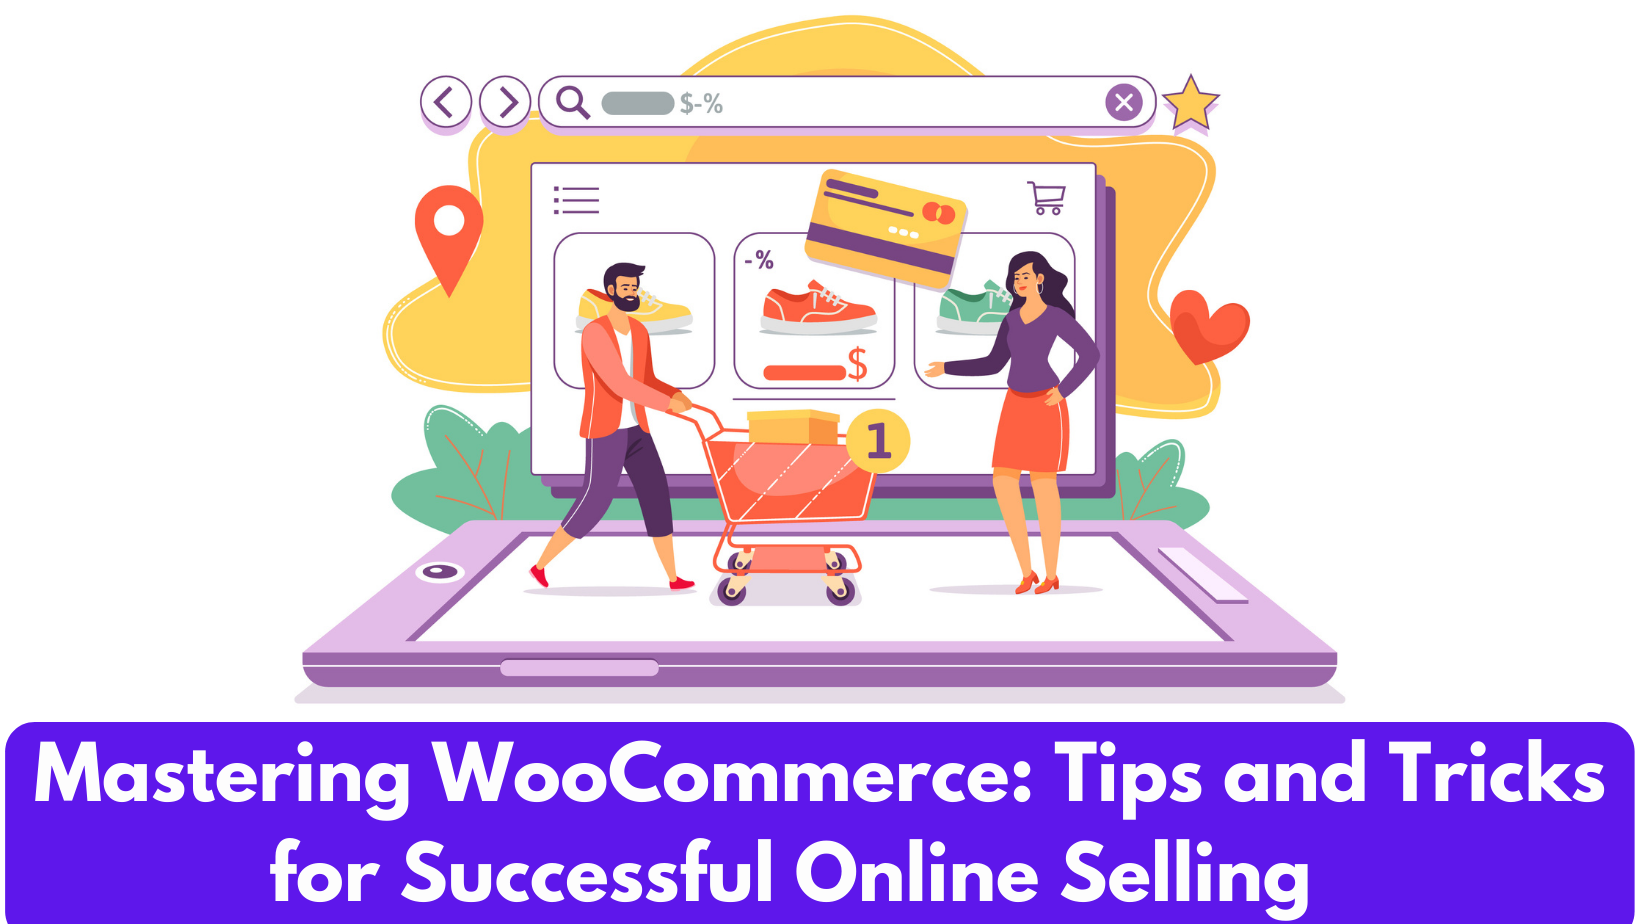 Mastering WooCommerce Tips and Tricks for Successful Online Selling